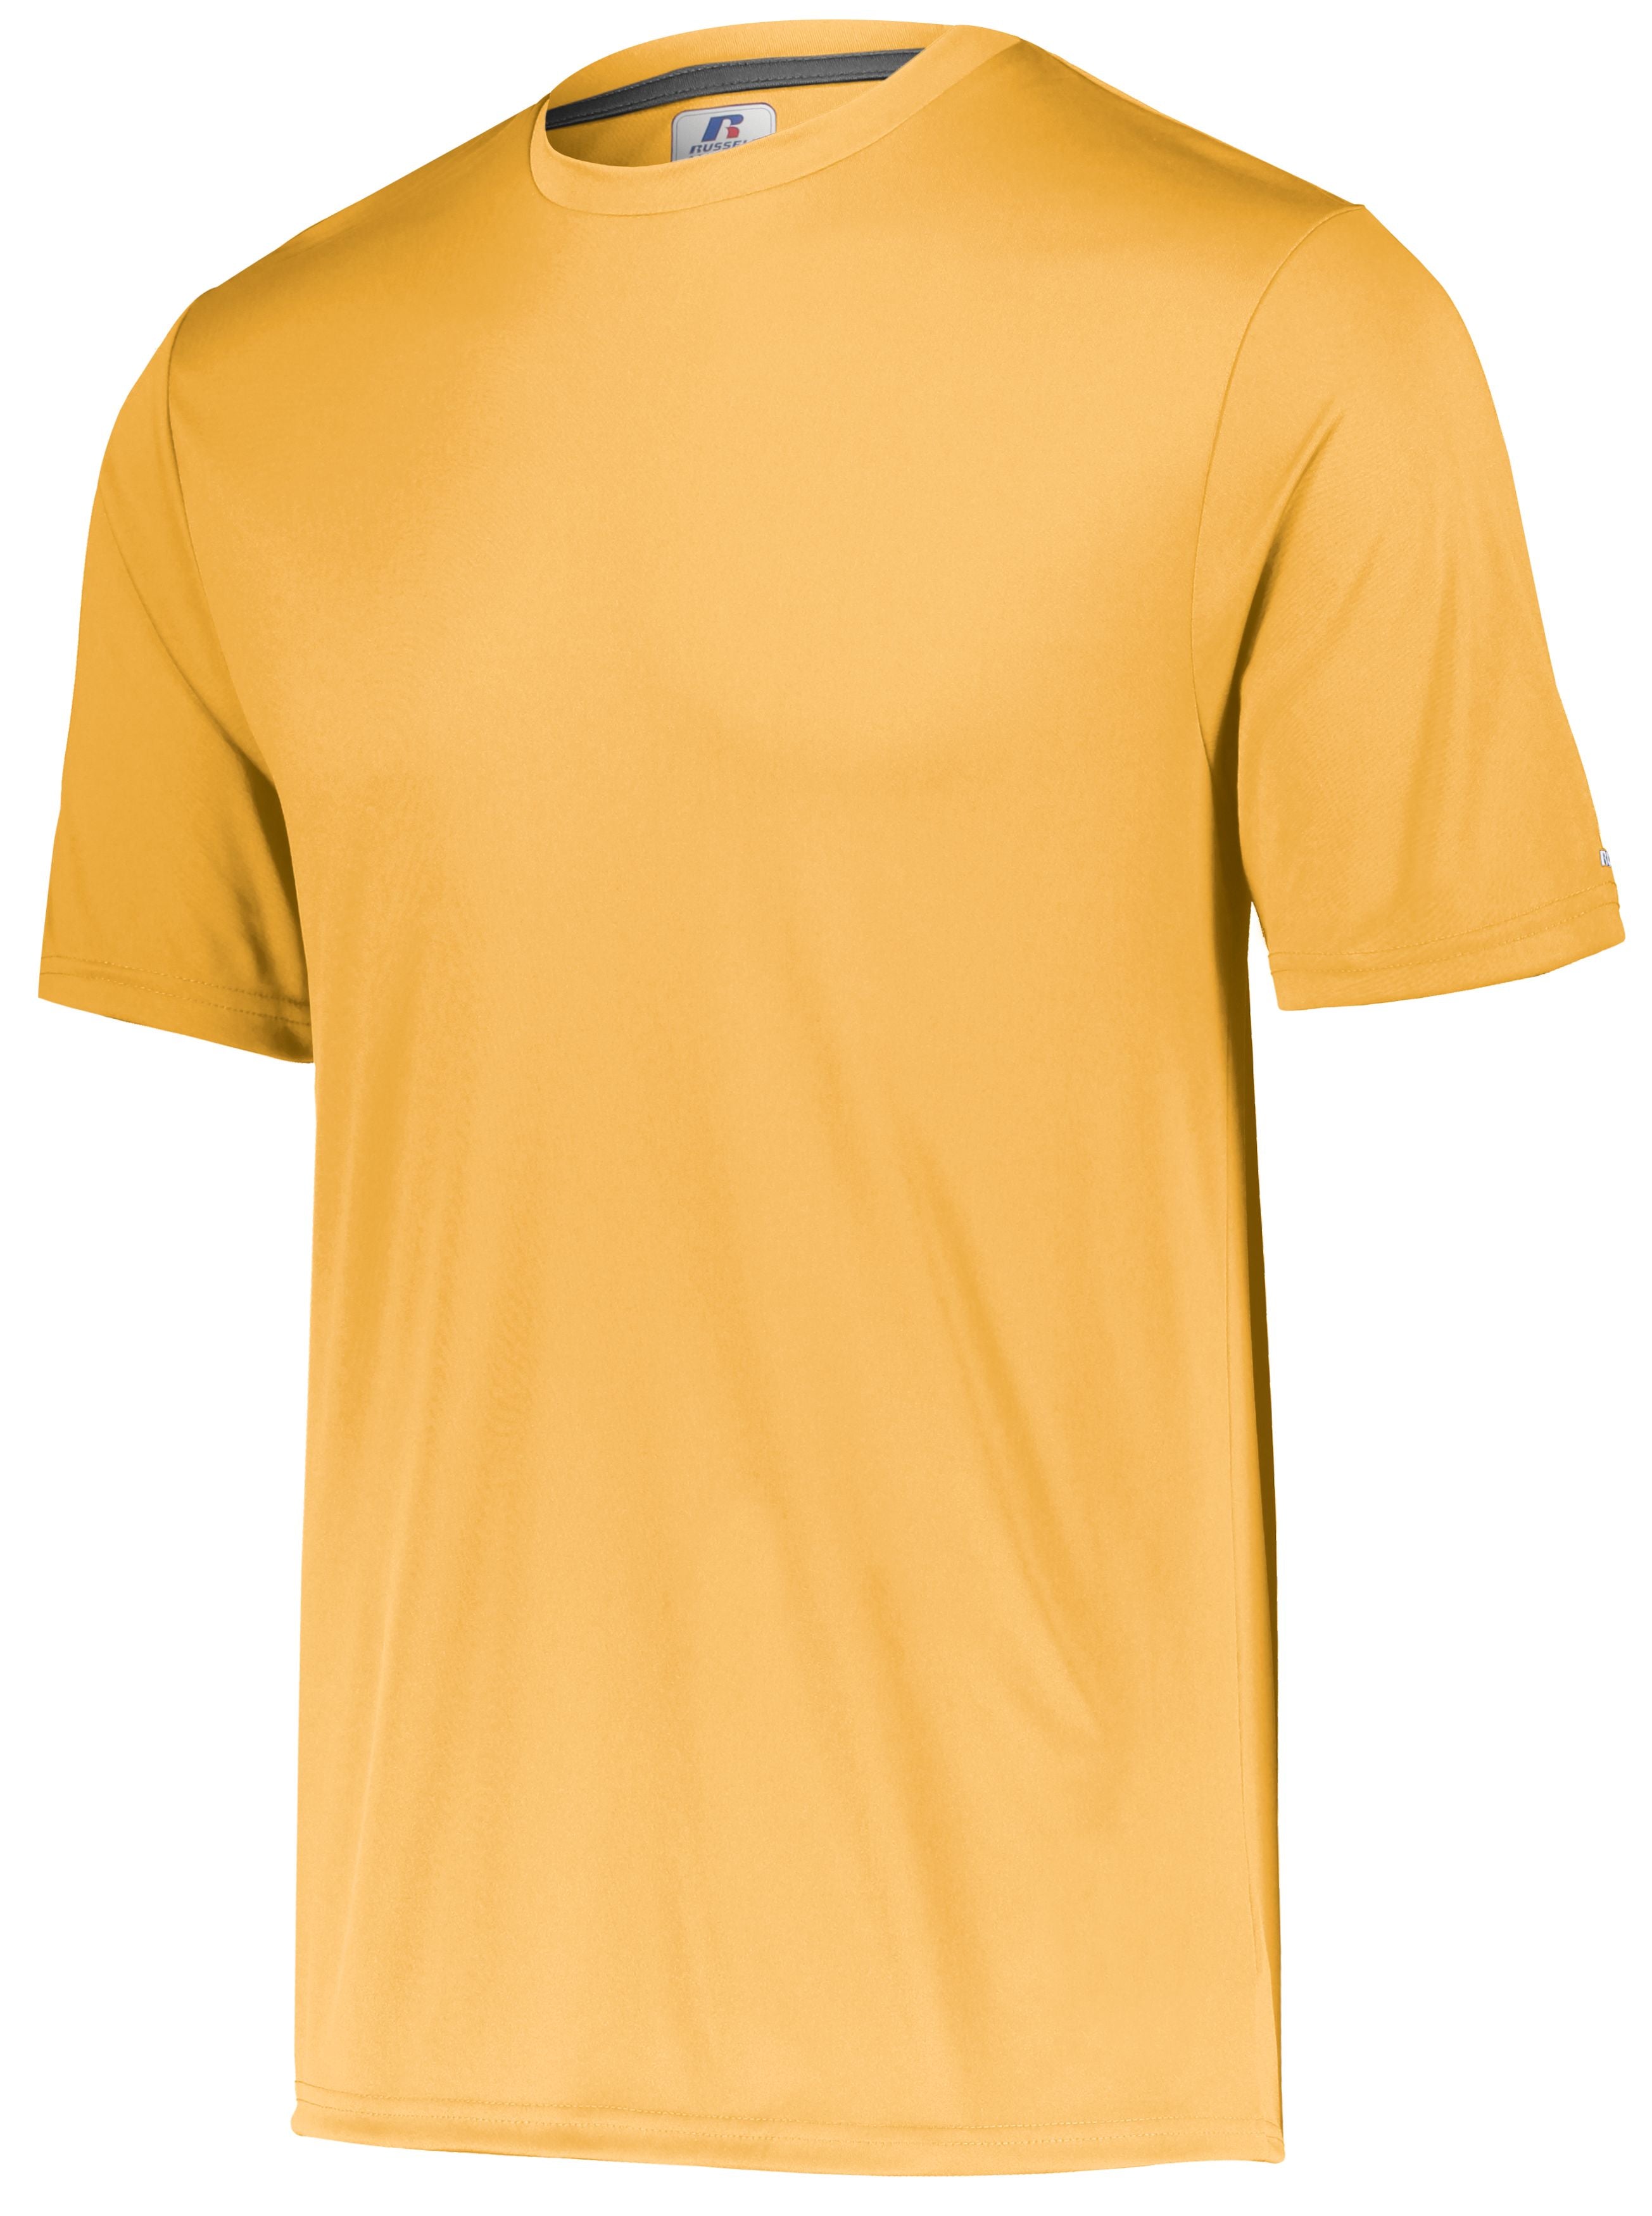 Russell Athletic Dri-Power Core Performance Tee in Gold  -Part of the Adult, Adult-Tee-Shirt, T-Shirts, Russell-Athletic-Products, Shirts product lines at KanaleyCreations.com